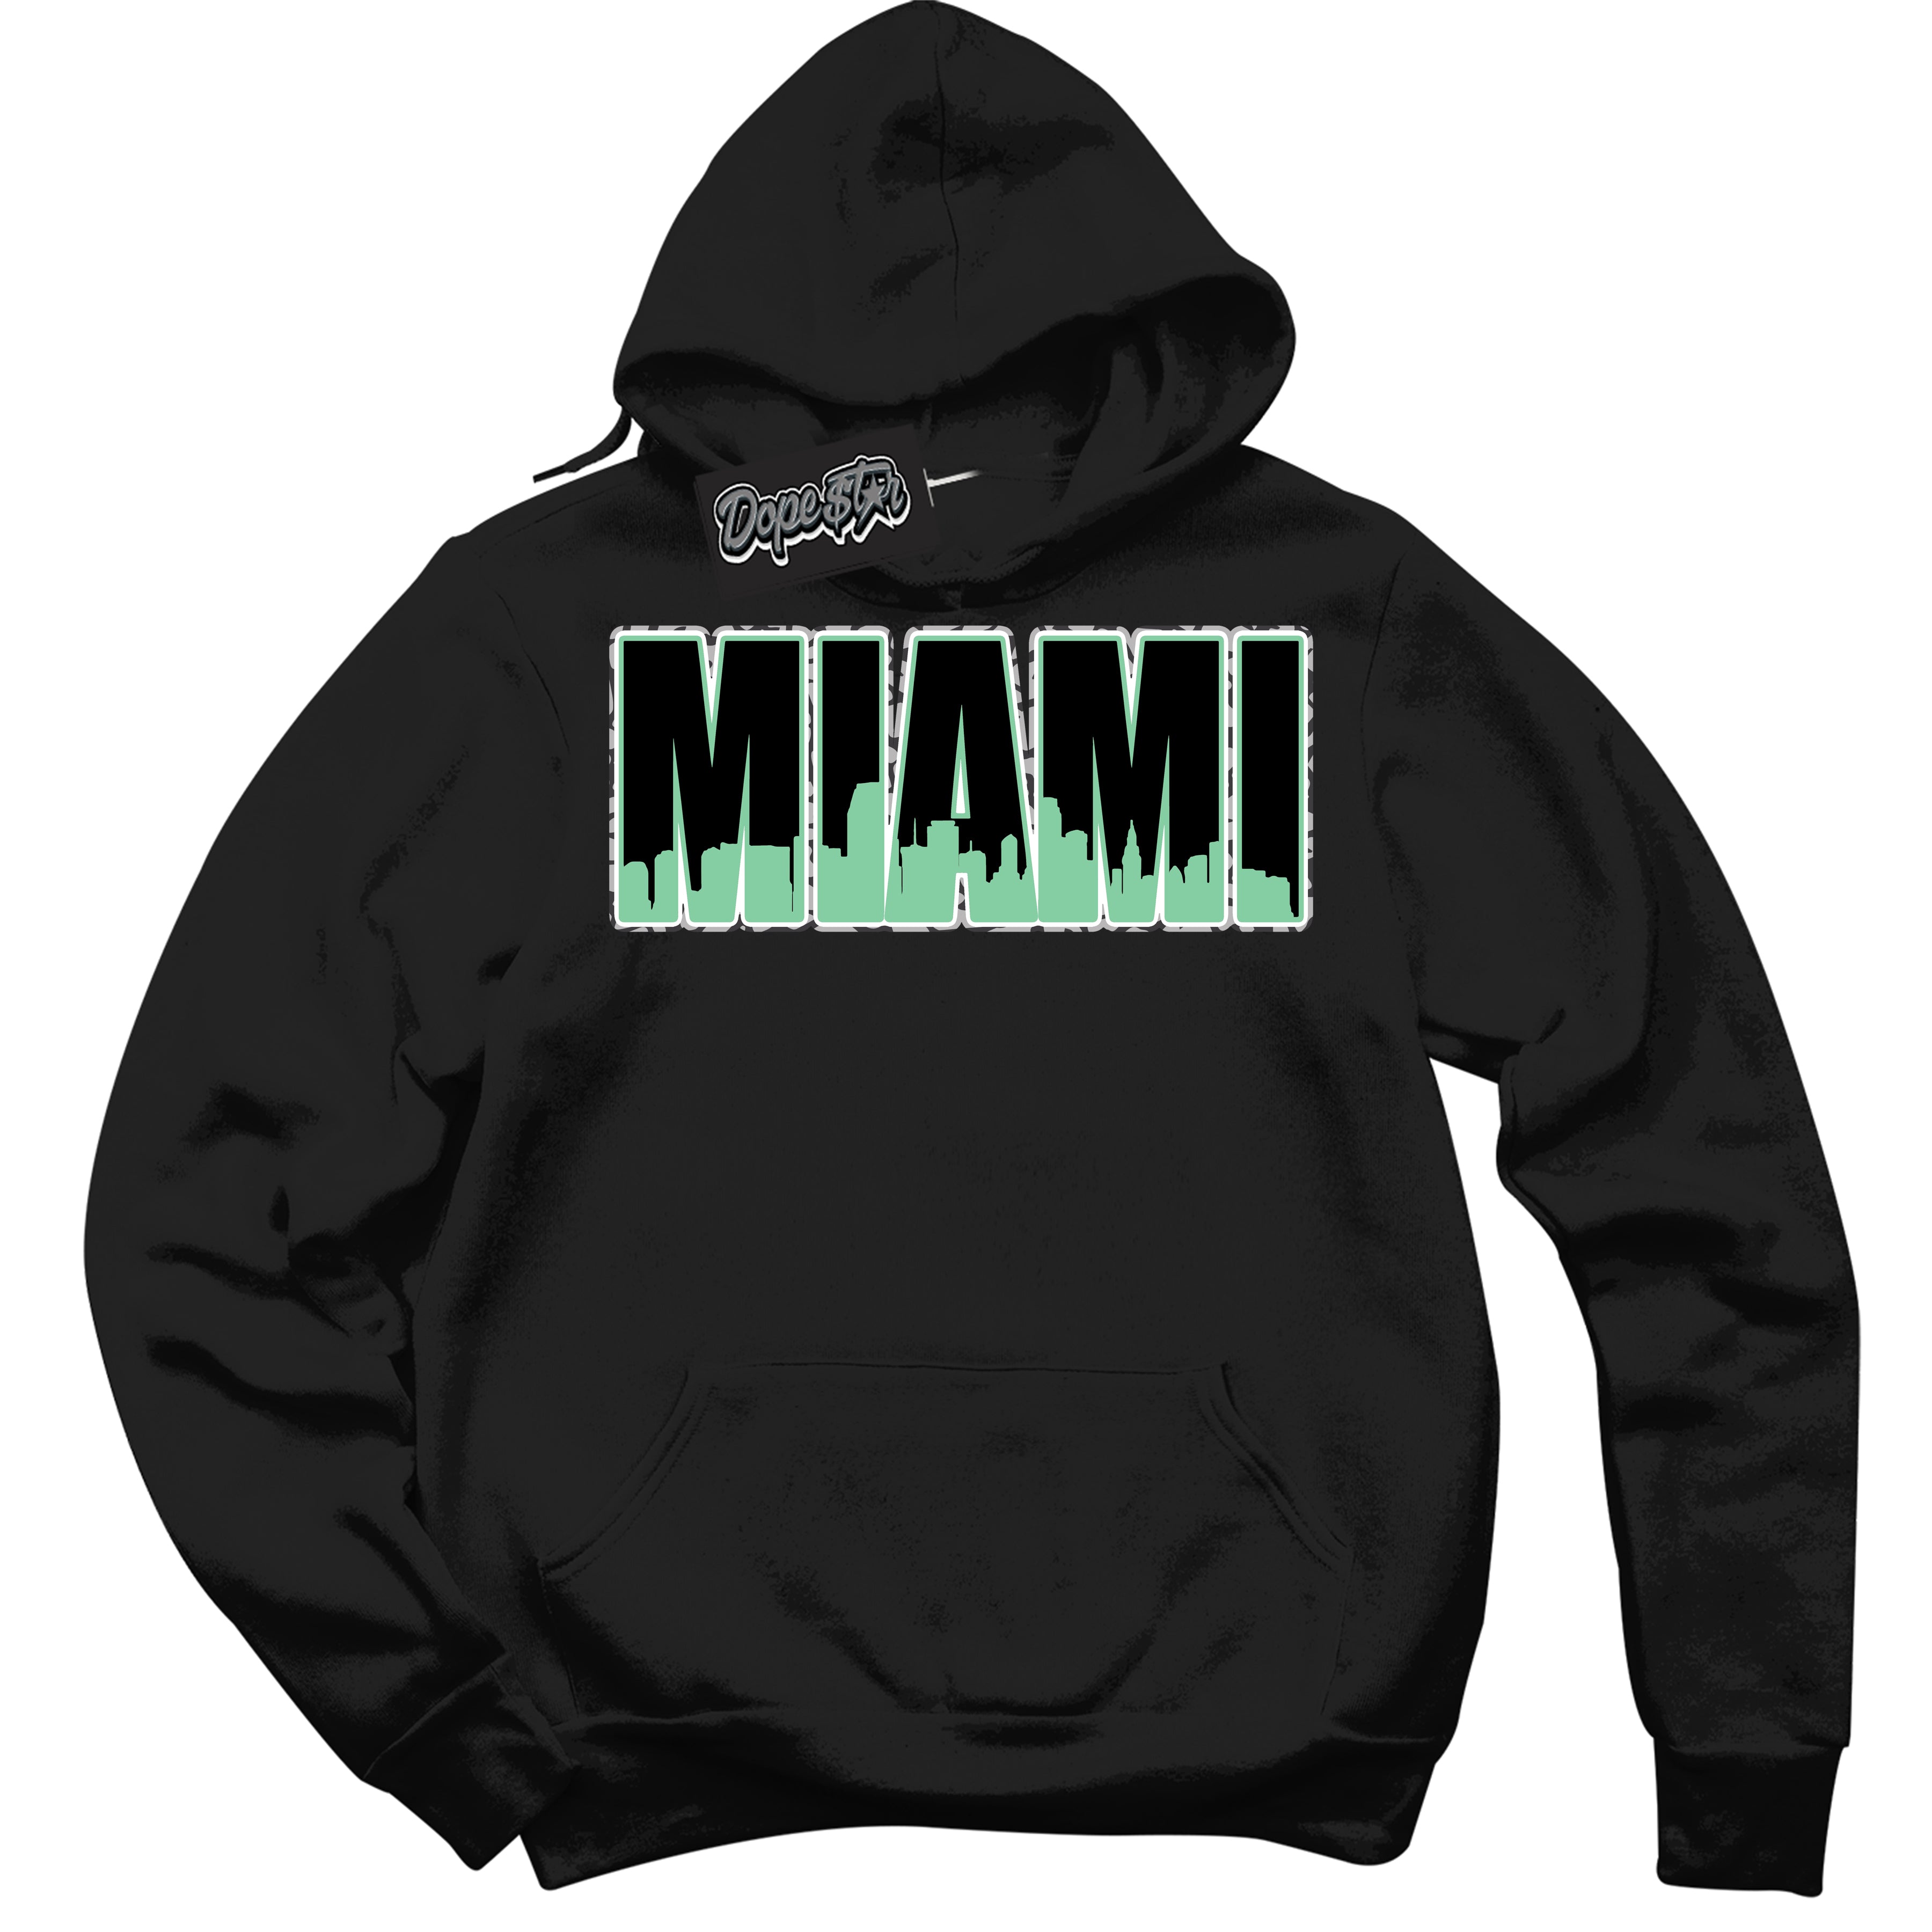 Cool Black Graphic DopeStar Hoodie with “ Miami “ print, that perfectly matches Green Glow 3S sneakers